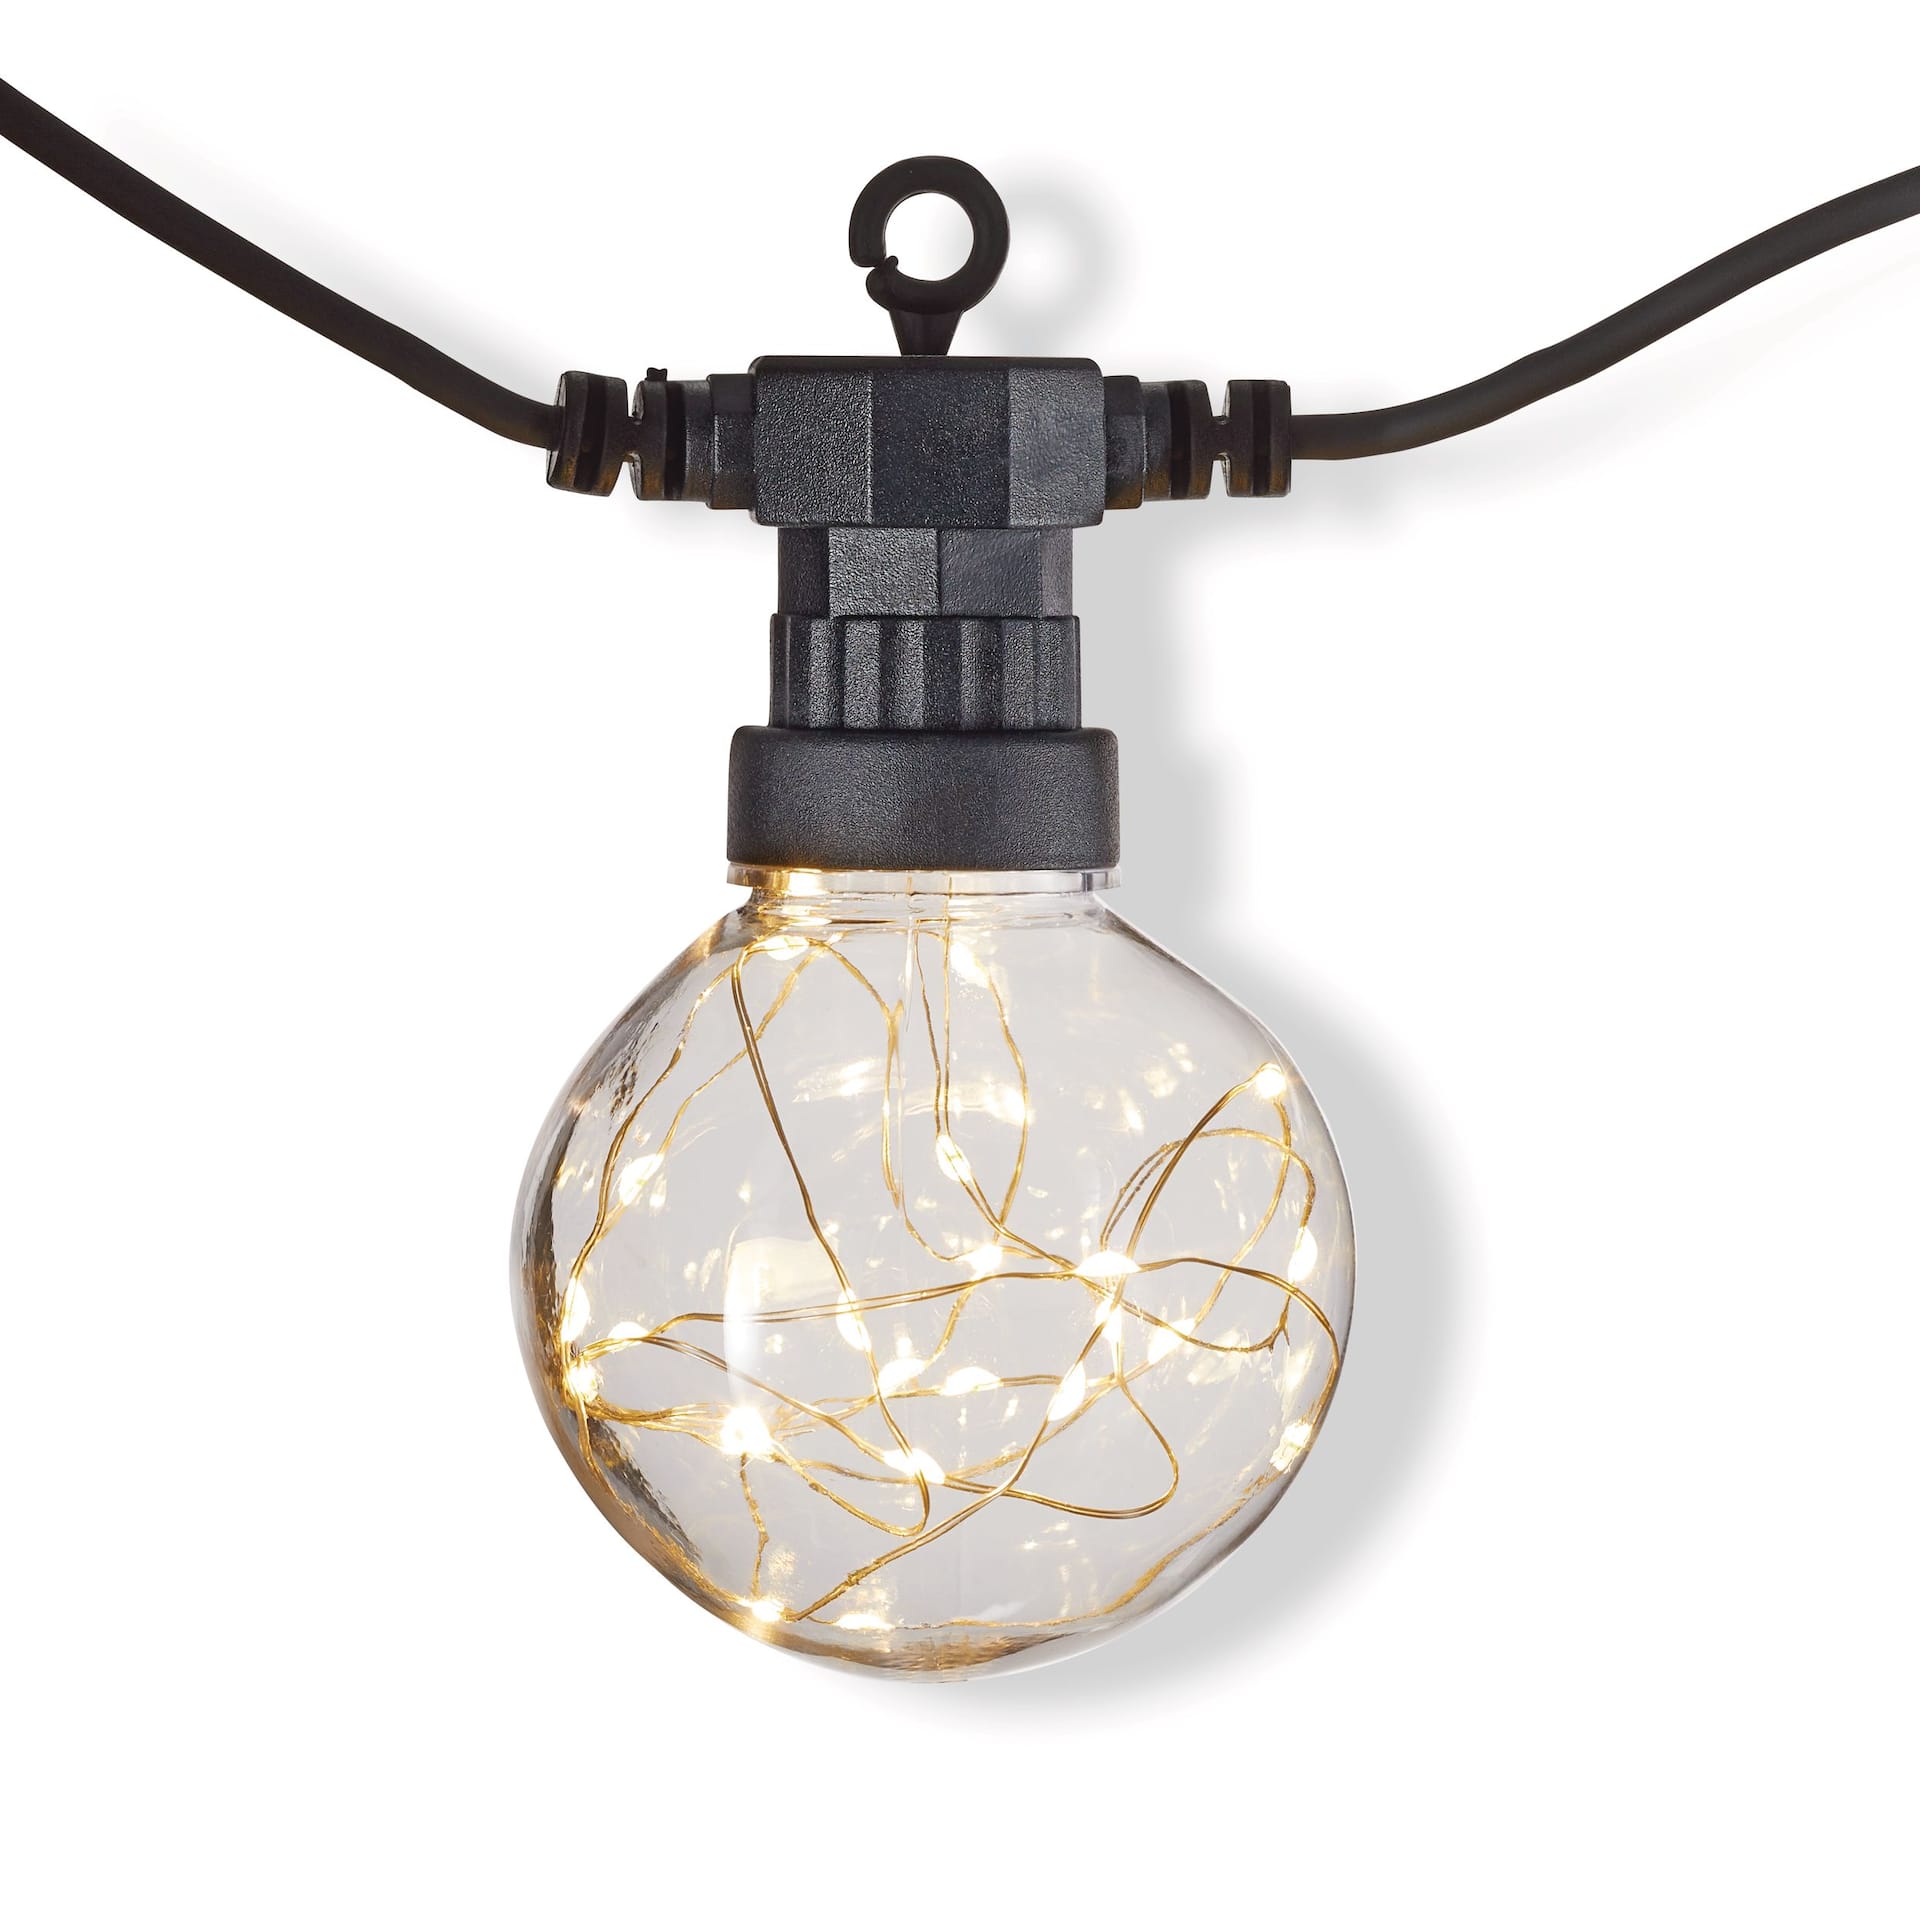 CANVAS Enchant Fairy Orb Outdoor Plug-In LED String Light